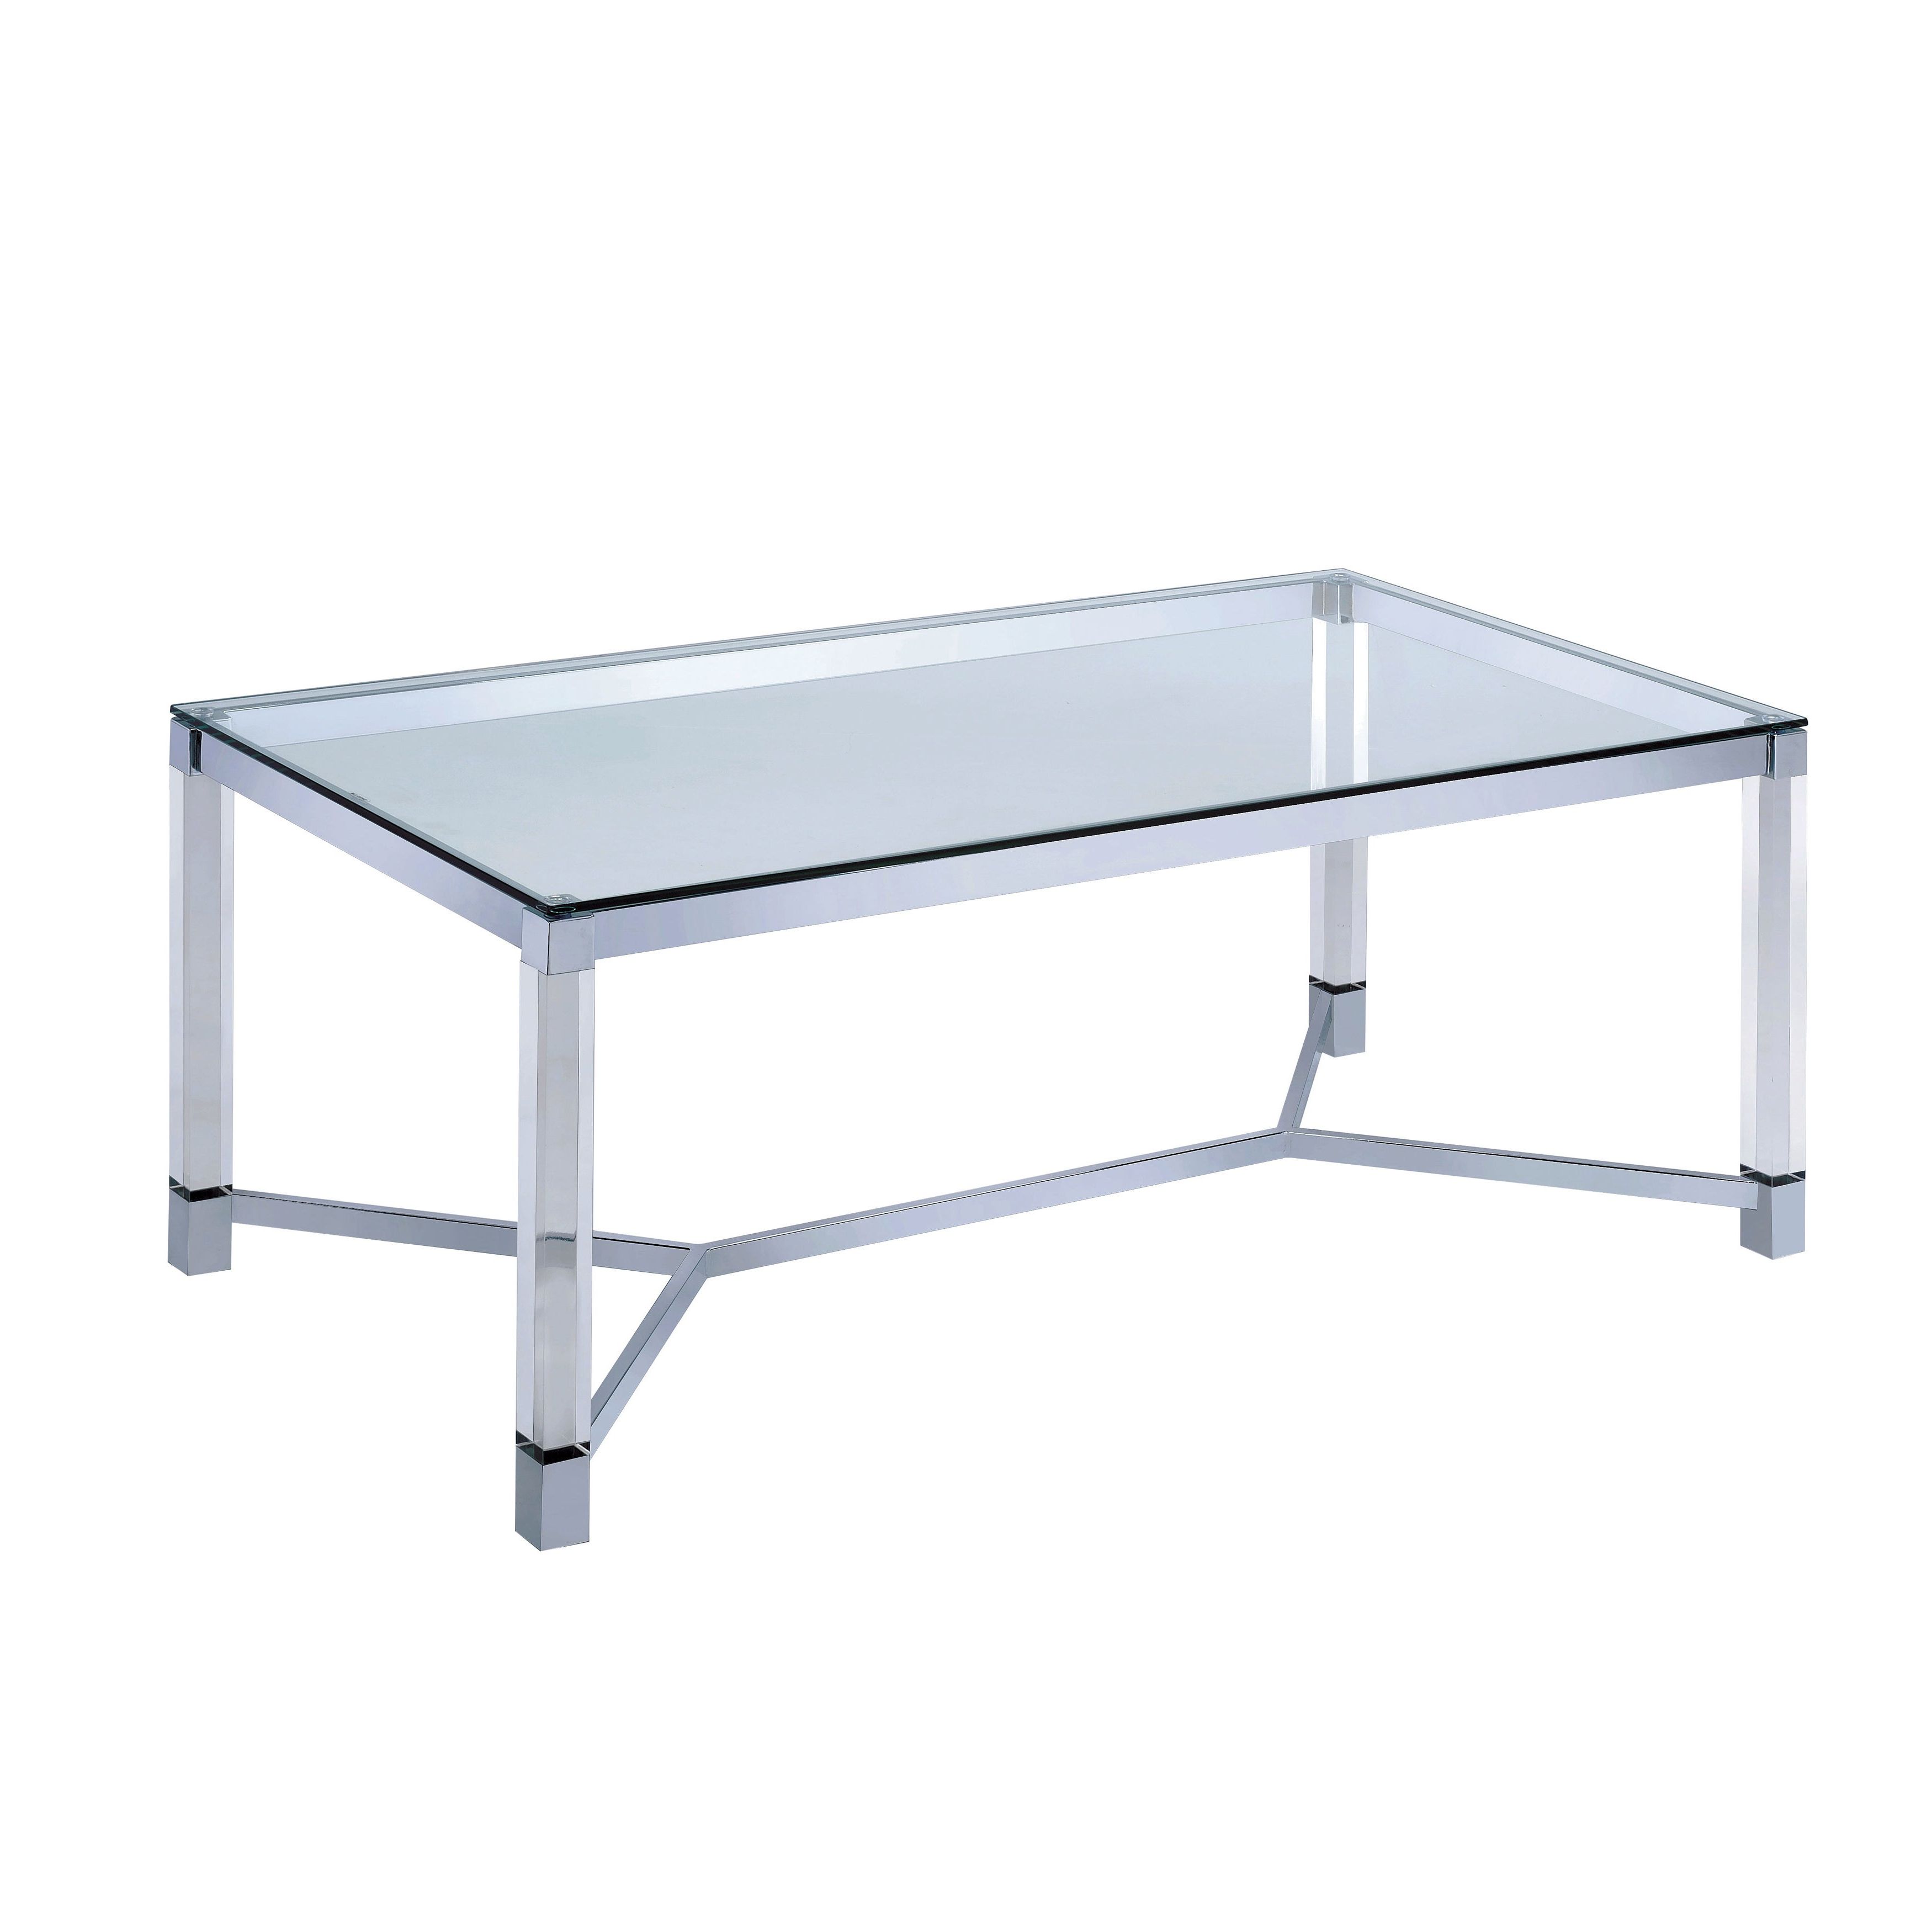 Rayna Contemporary Chrome Tempered Glass Coffee Tablefoa Intended For Latest Thalberg Contemporary Chrome Coffee Tables By Foa (View 13 of 20)